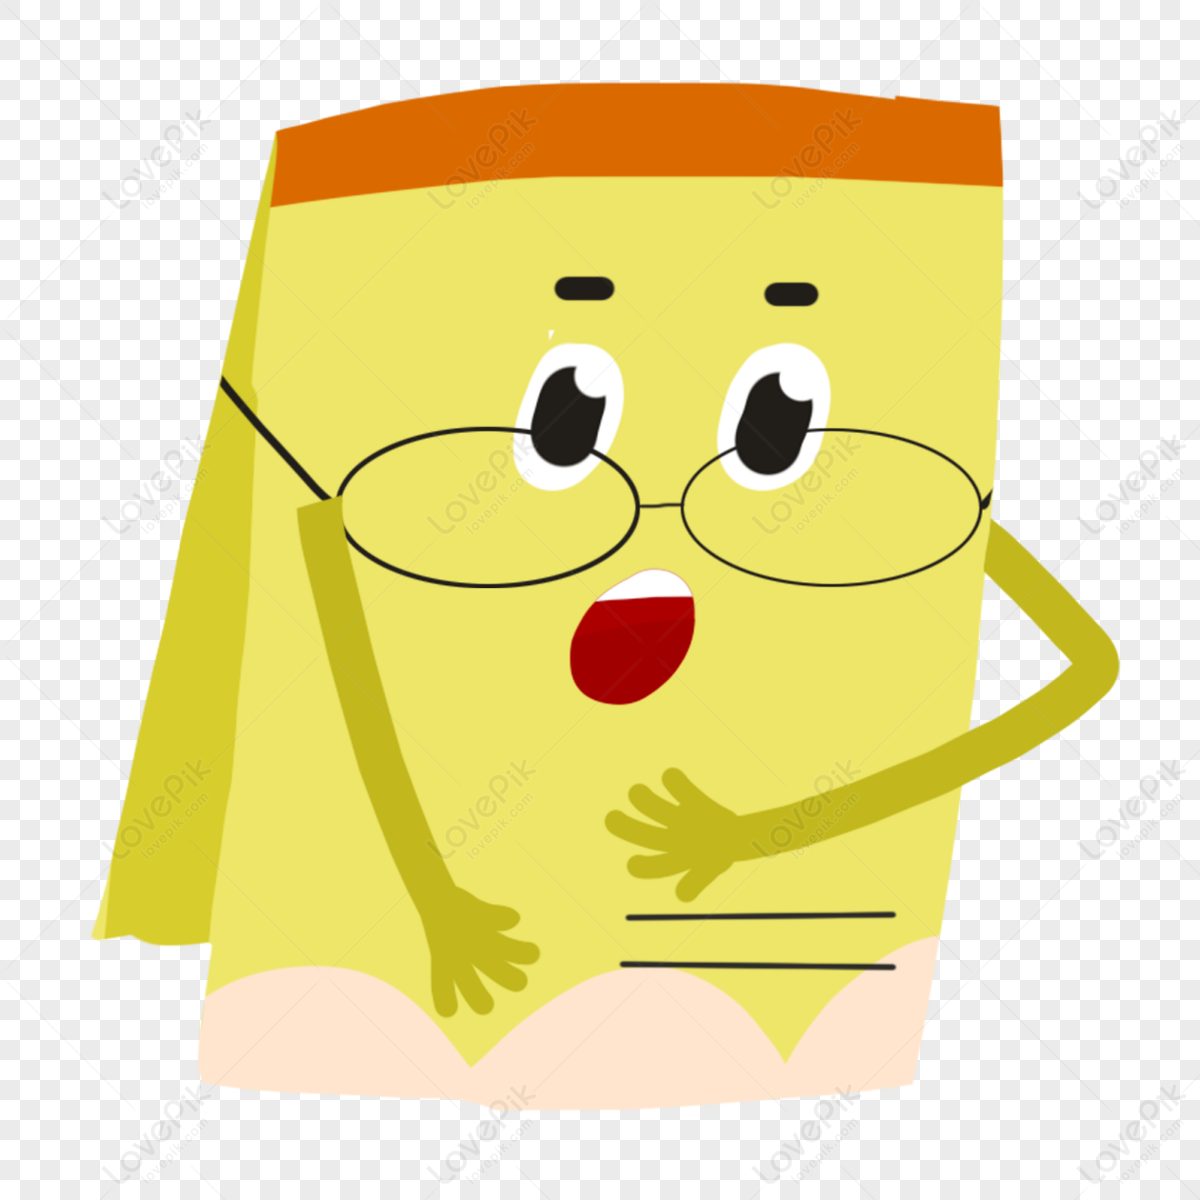 Creative design cute school supplies cartoon image sticky note eyes,creative images,pencils png picture